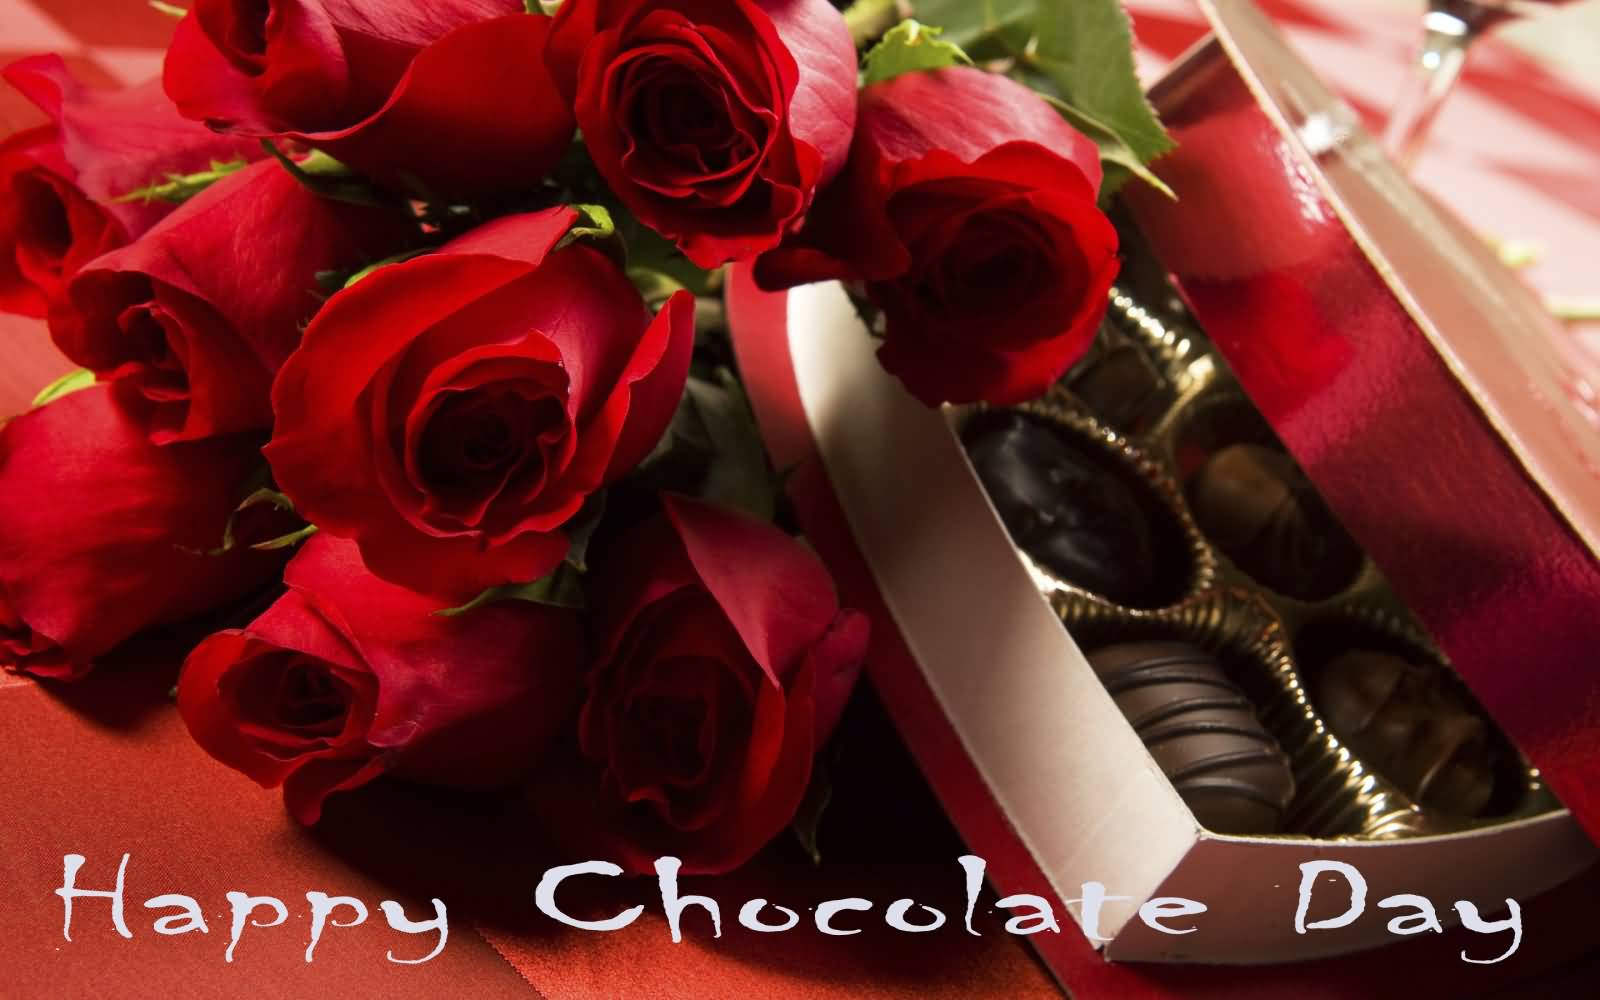 Happy Chocolate Day Rose Flowers And Chocolates For You